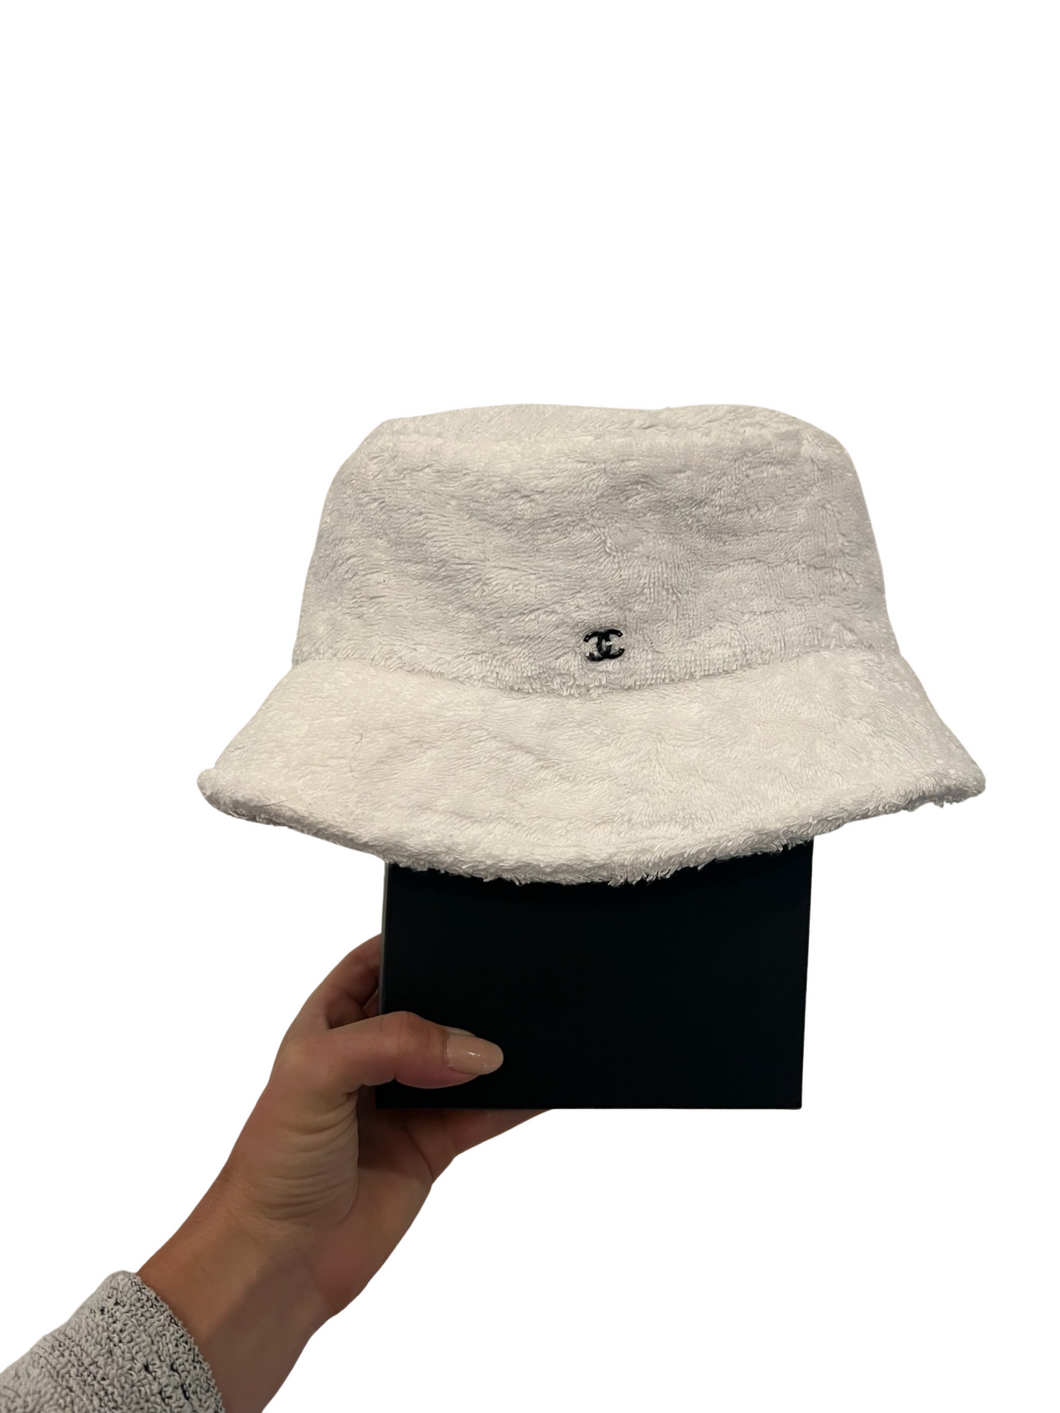 The Terry Cloth Hat